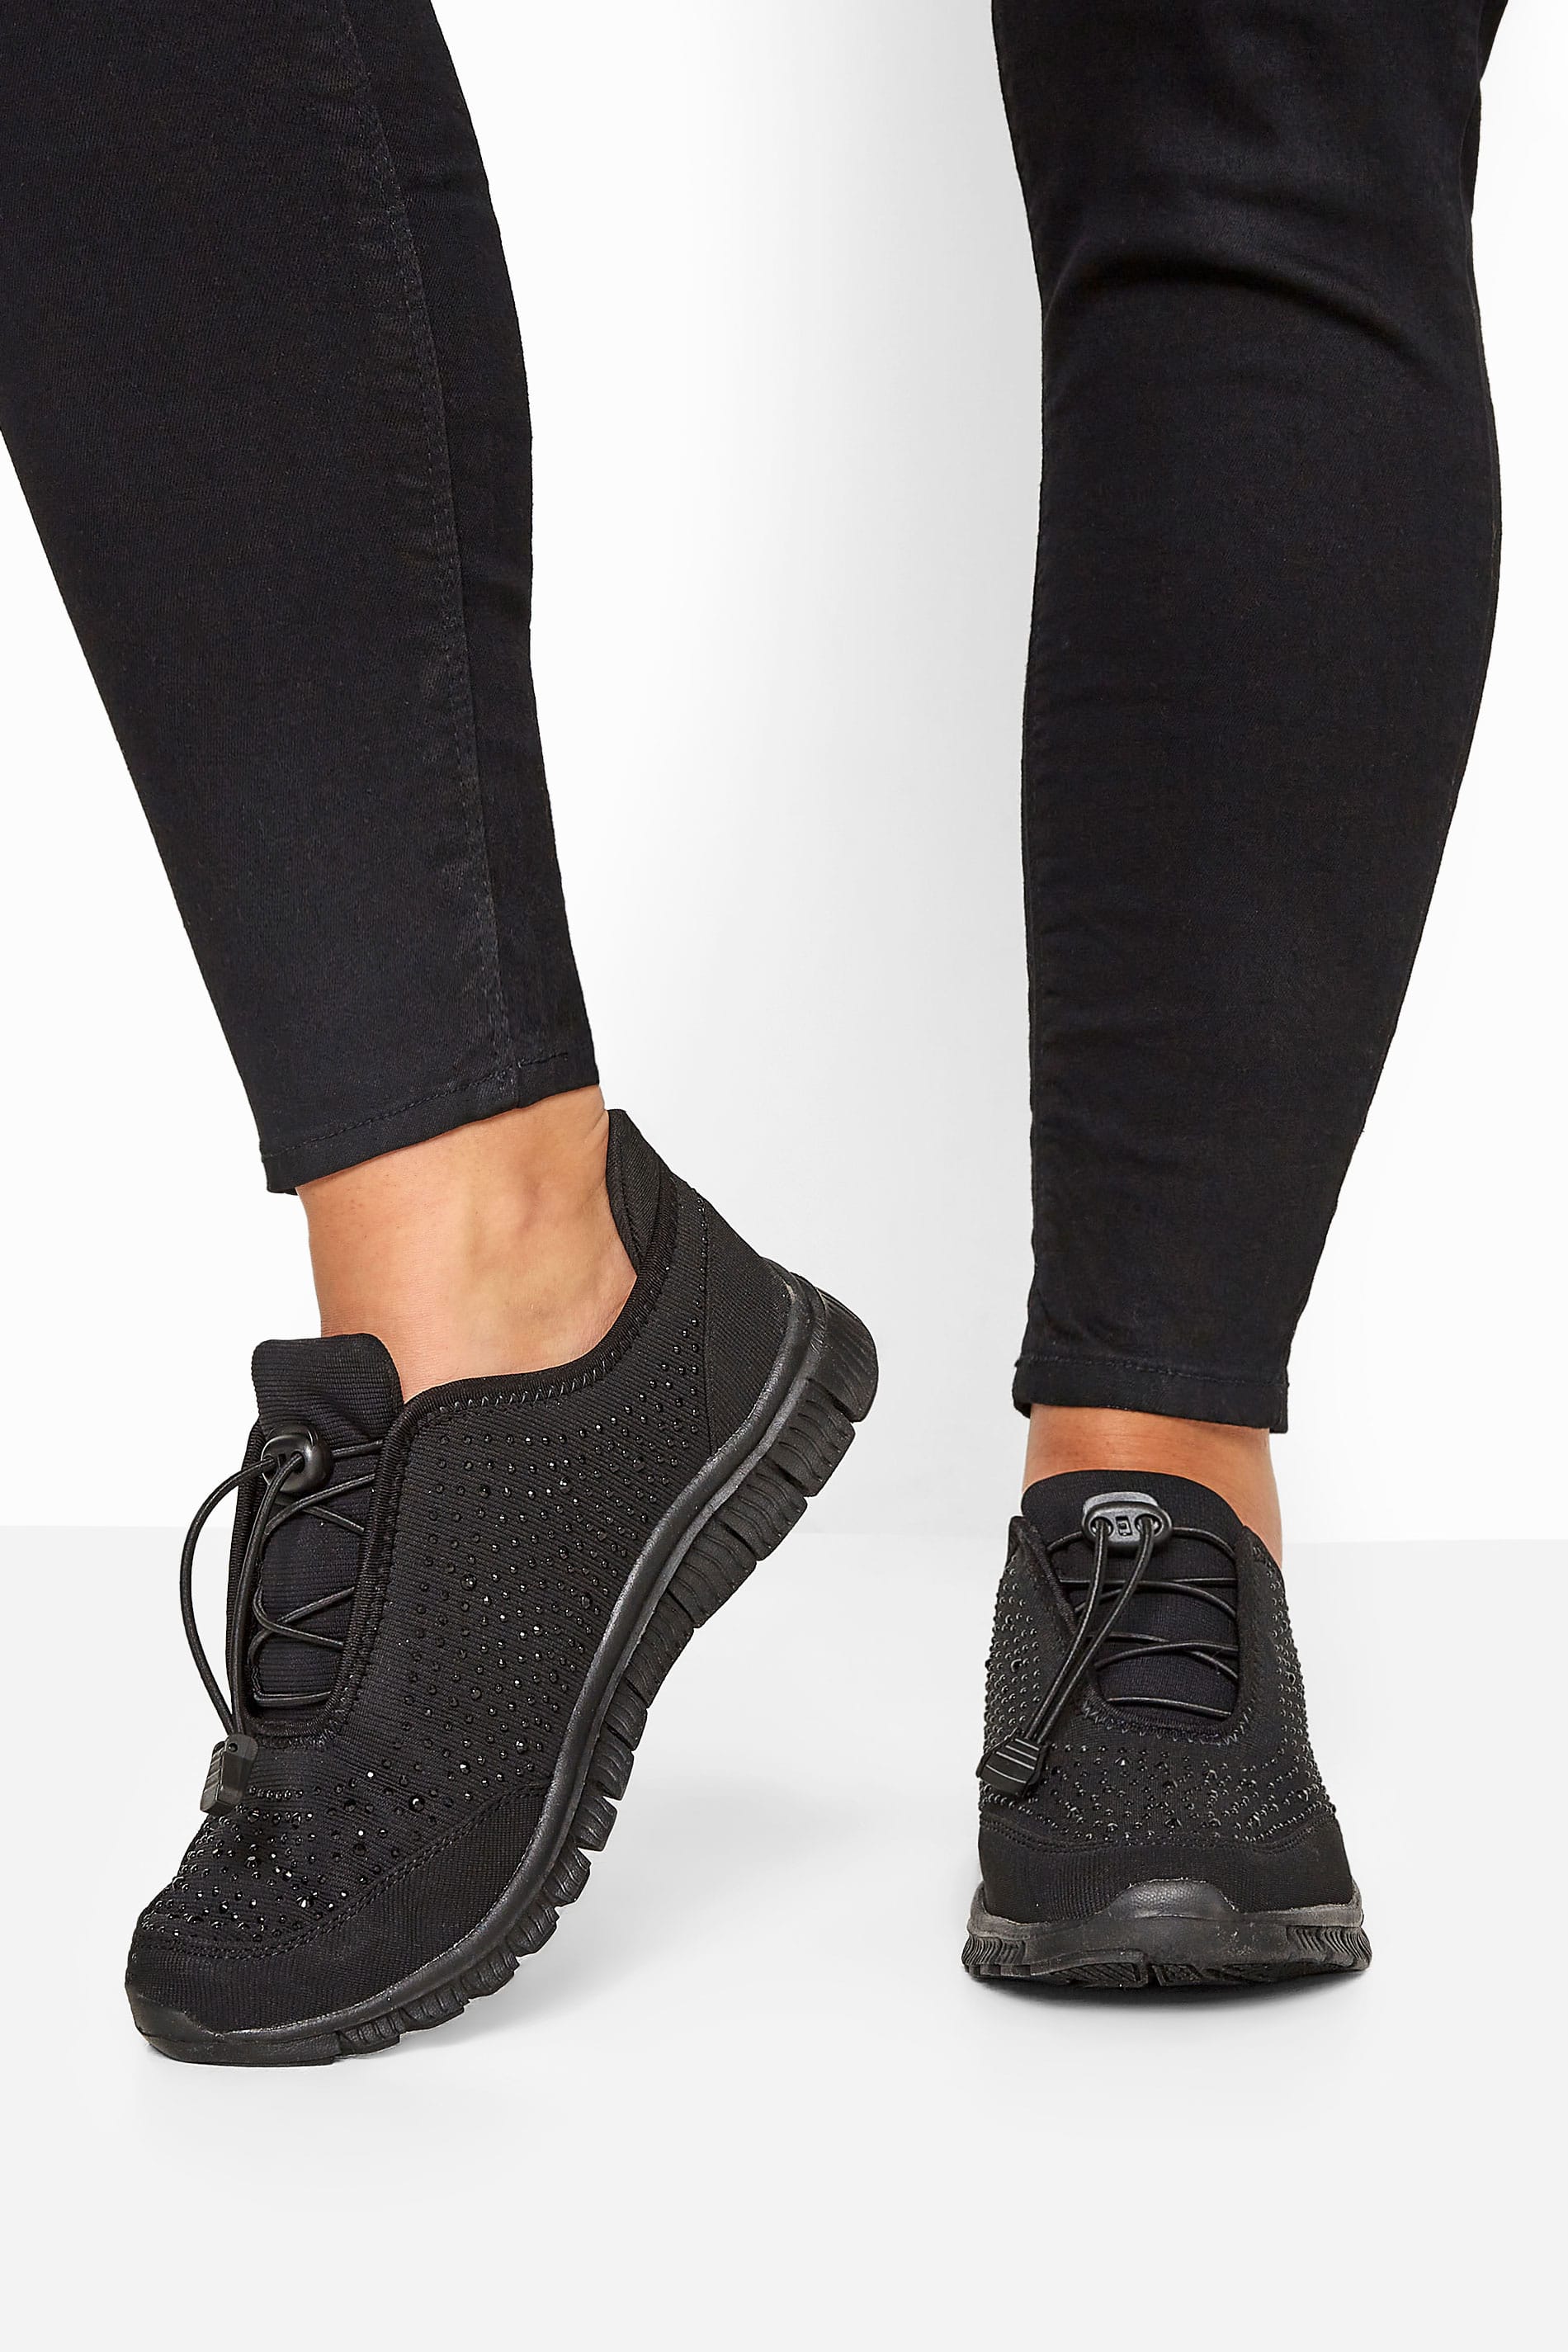 Black Embellished Drawcord Trainers In Wide E Fit & Extra Wide EEE Fit | Yours Clothing 1